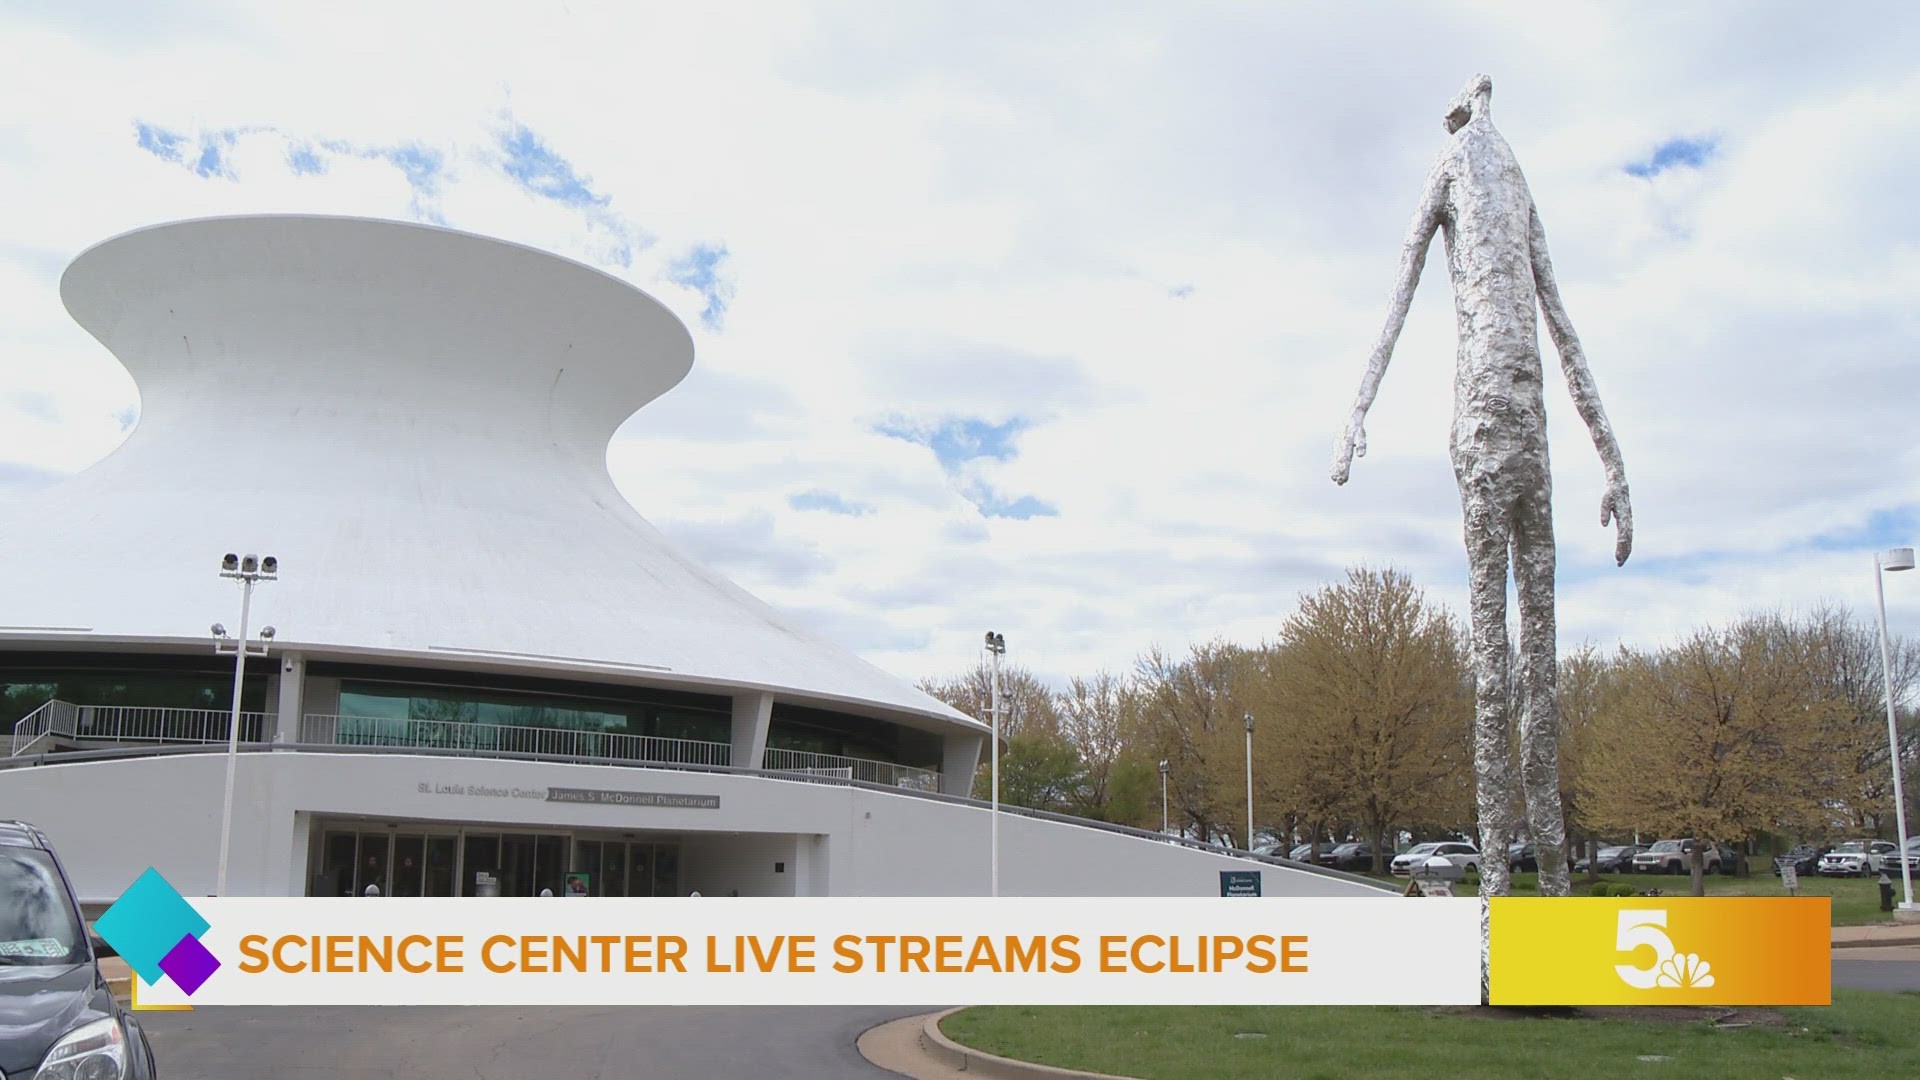 The science center's planetarium is hosting a live streaming event of all of the locations along totality throughout Missouri.